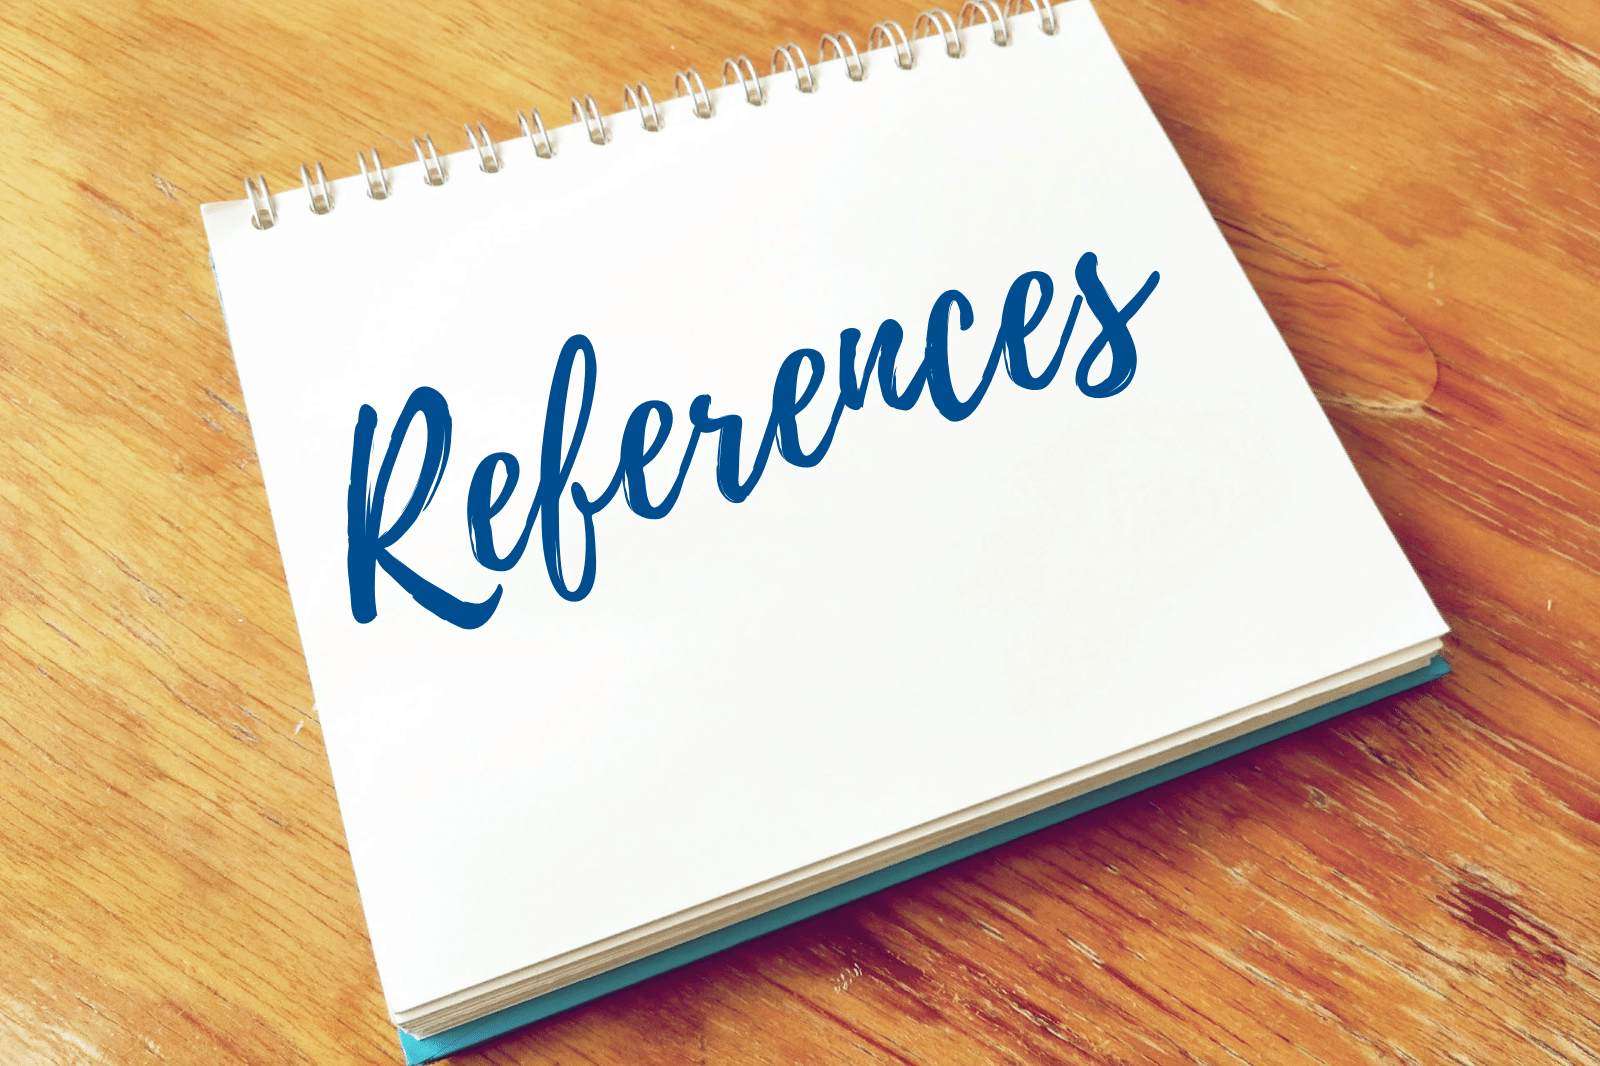 references is an example of